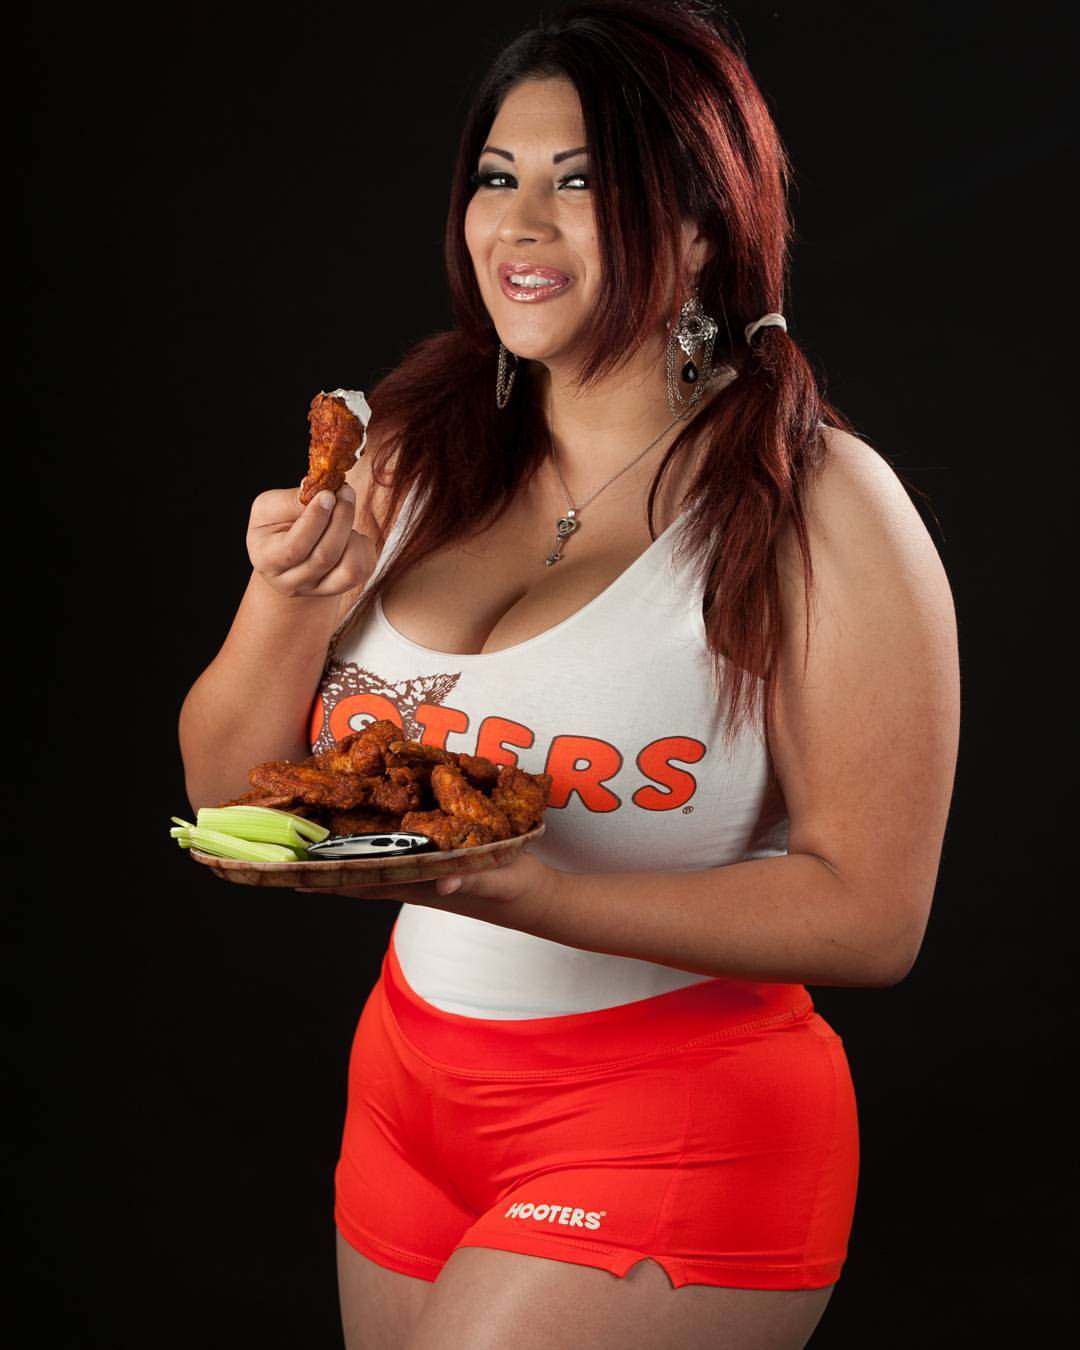 Hooters girls with wings